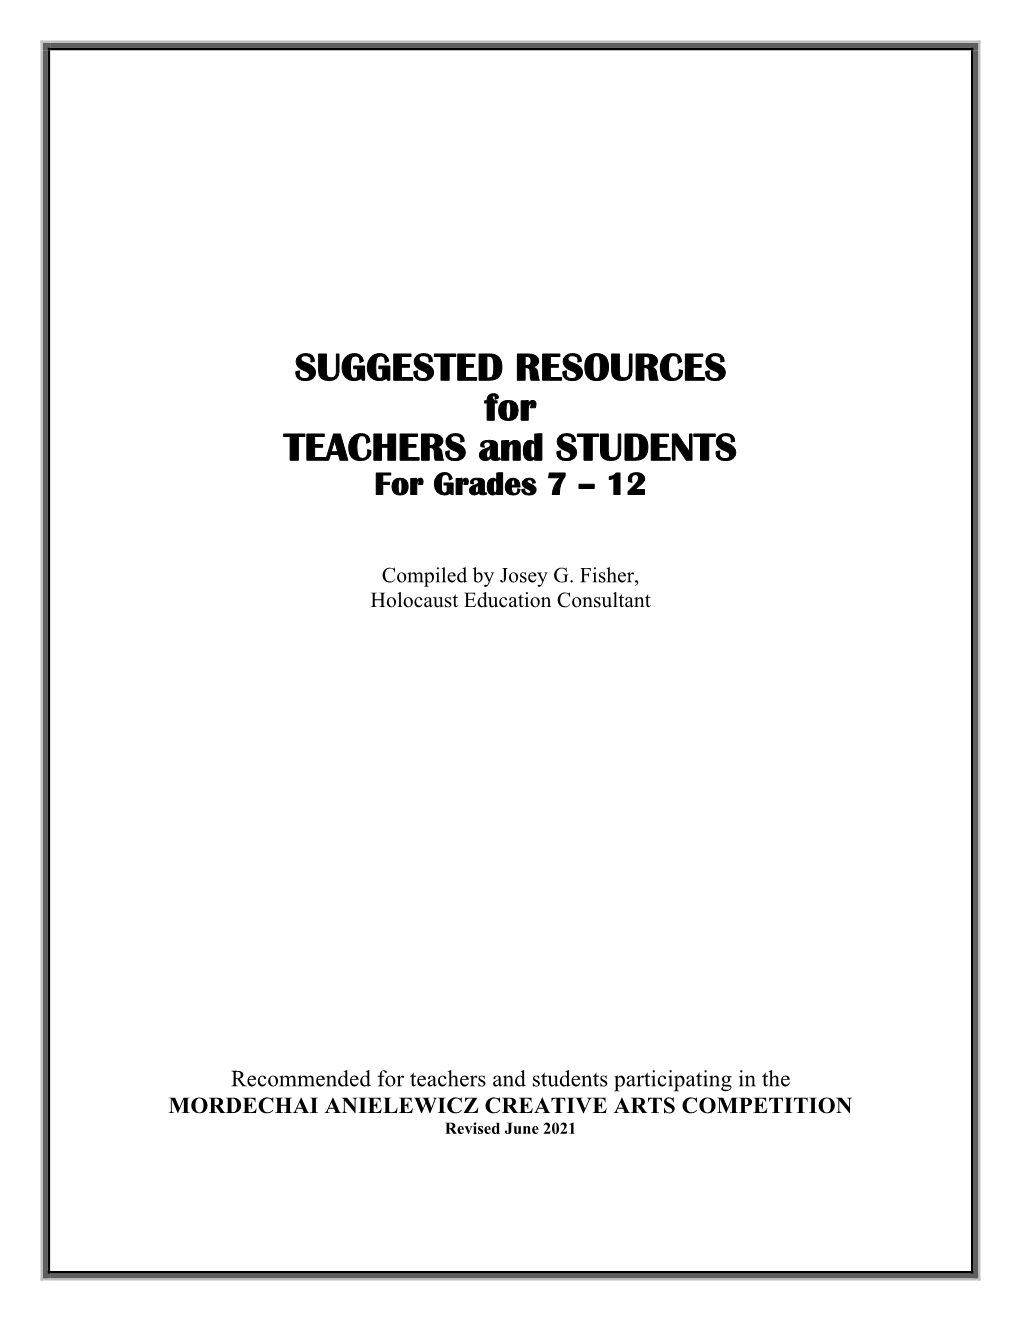 SUGGESTED RESOURCES for TEACHERS and STUDENTS for Grades 7 – 12